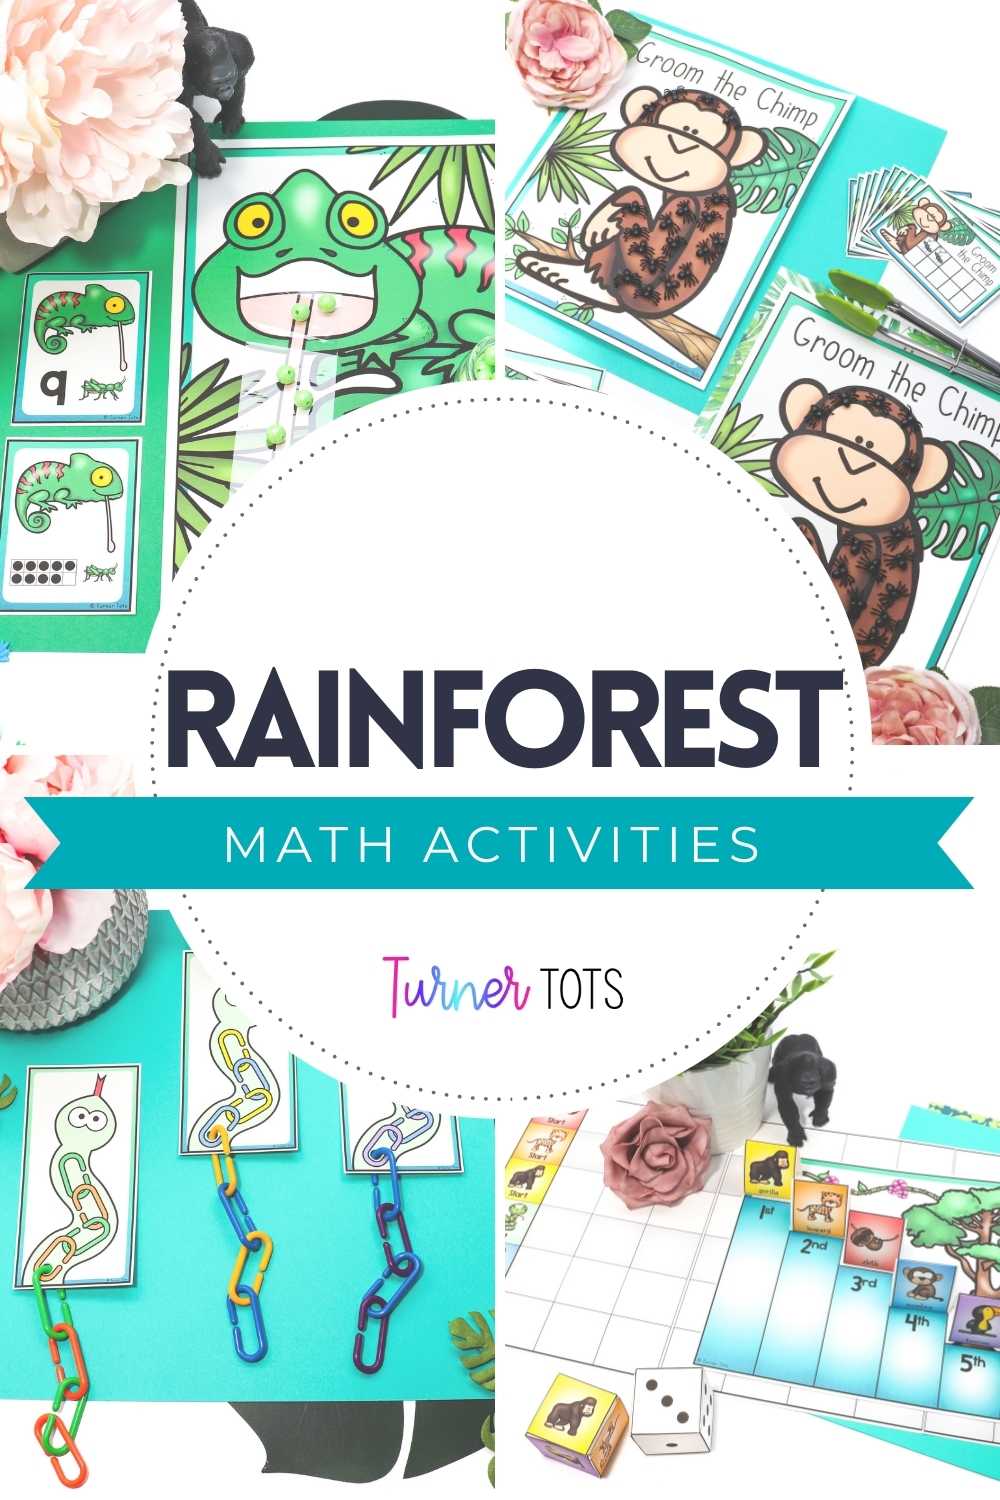 Jungle math activities include a chameleon counting activity, a chimp ten frame game, snake patterns, and a jungle race game.